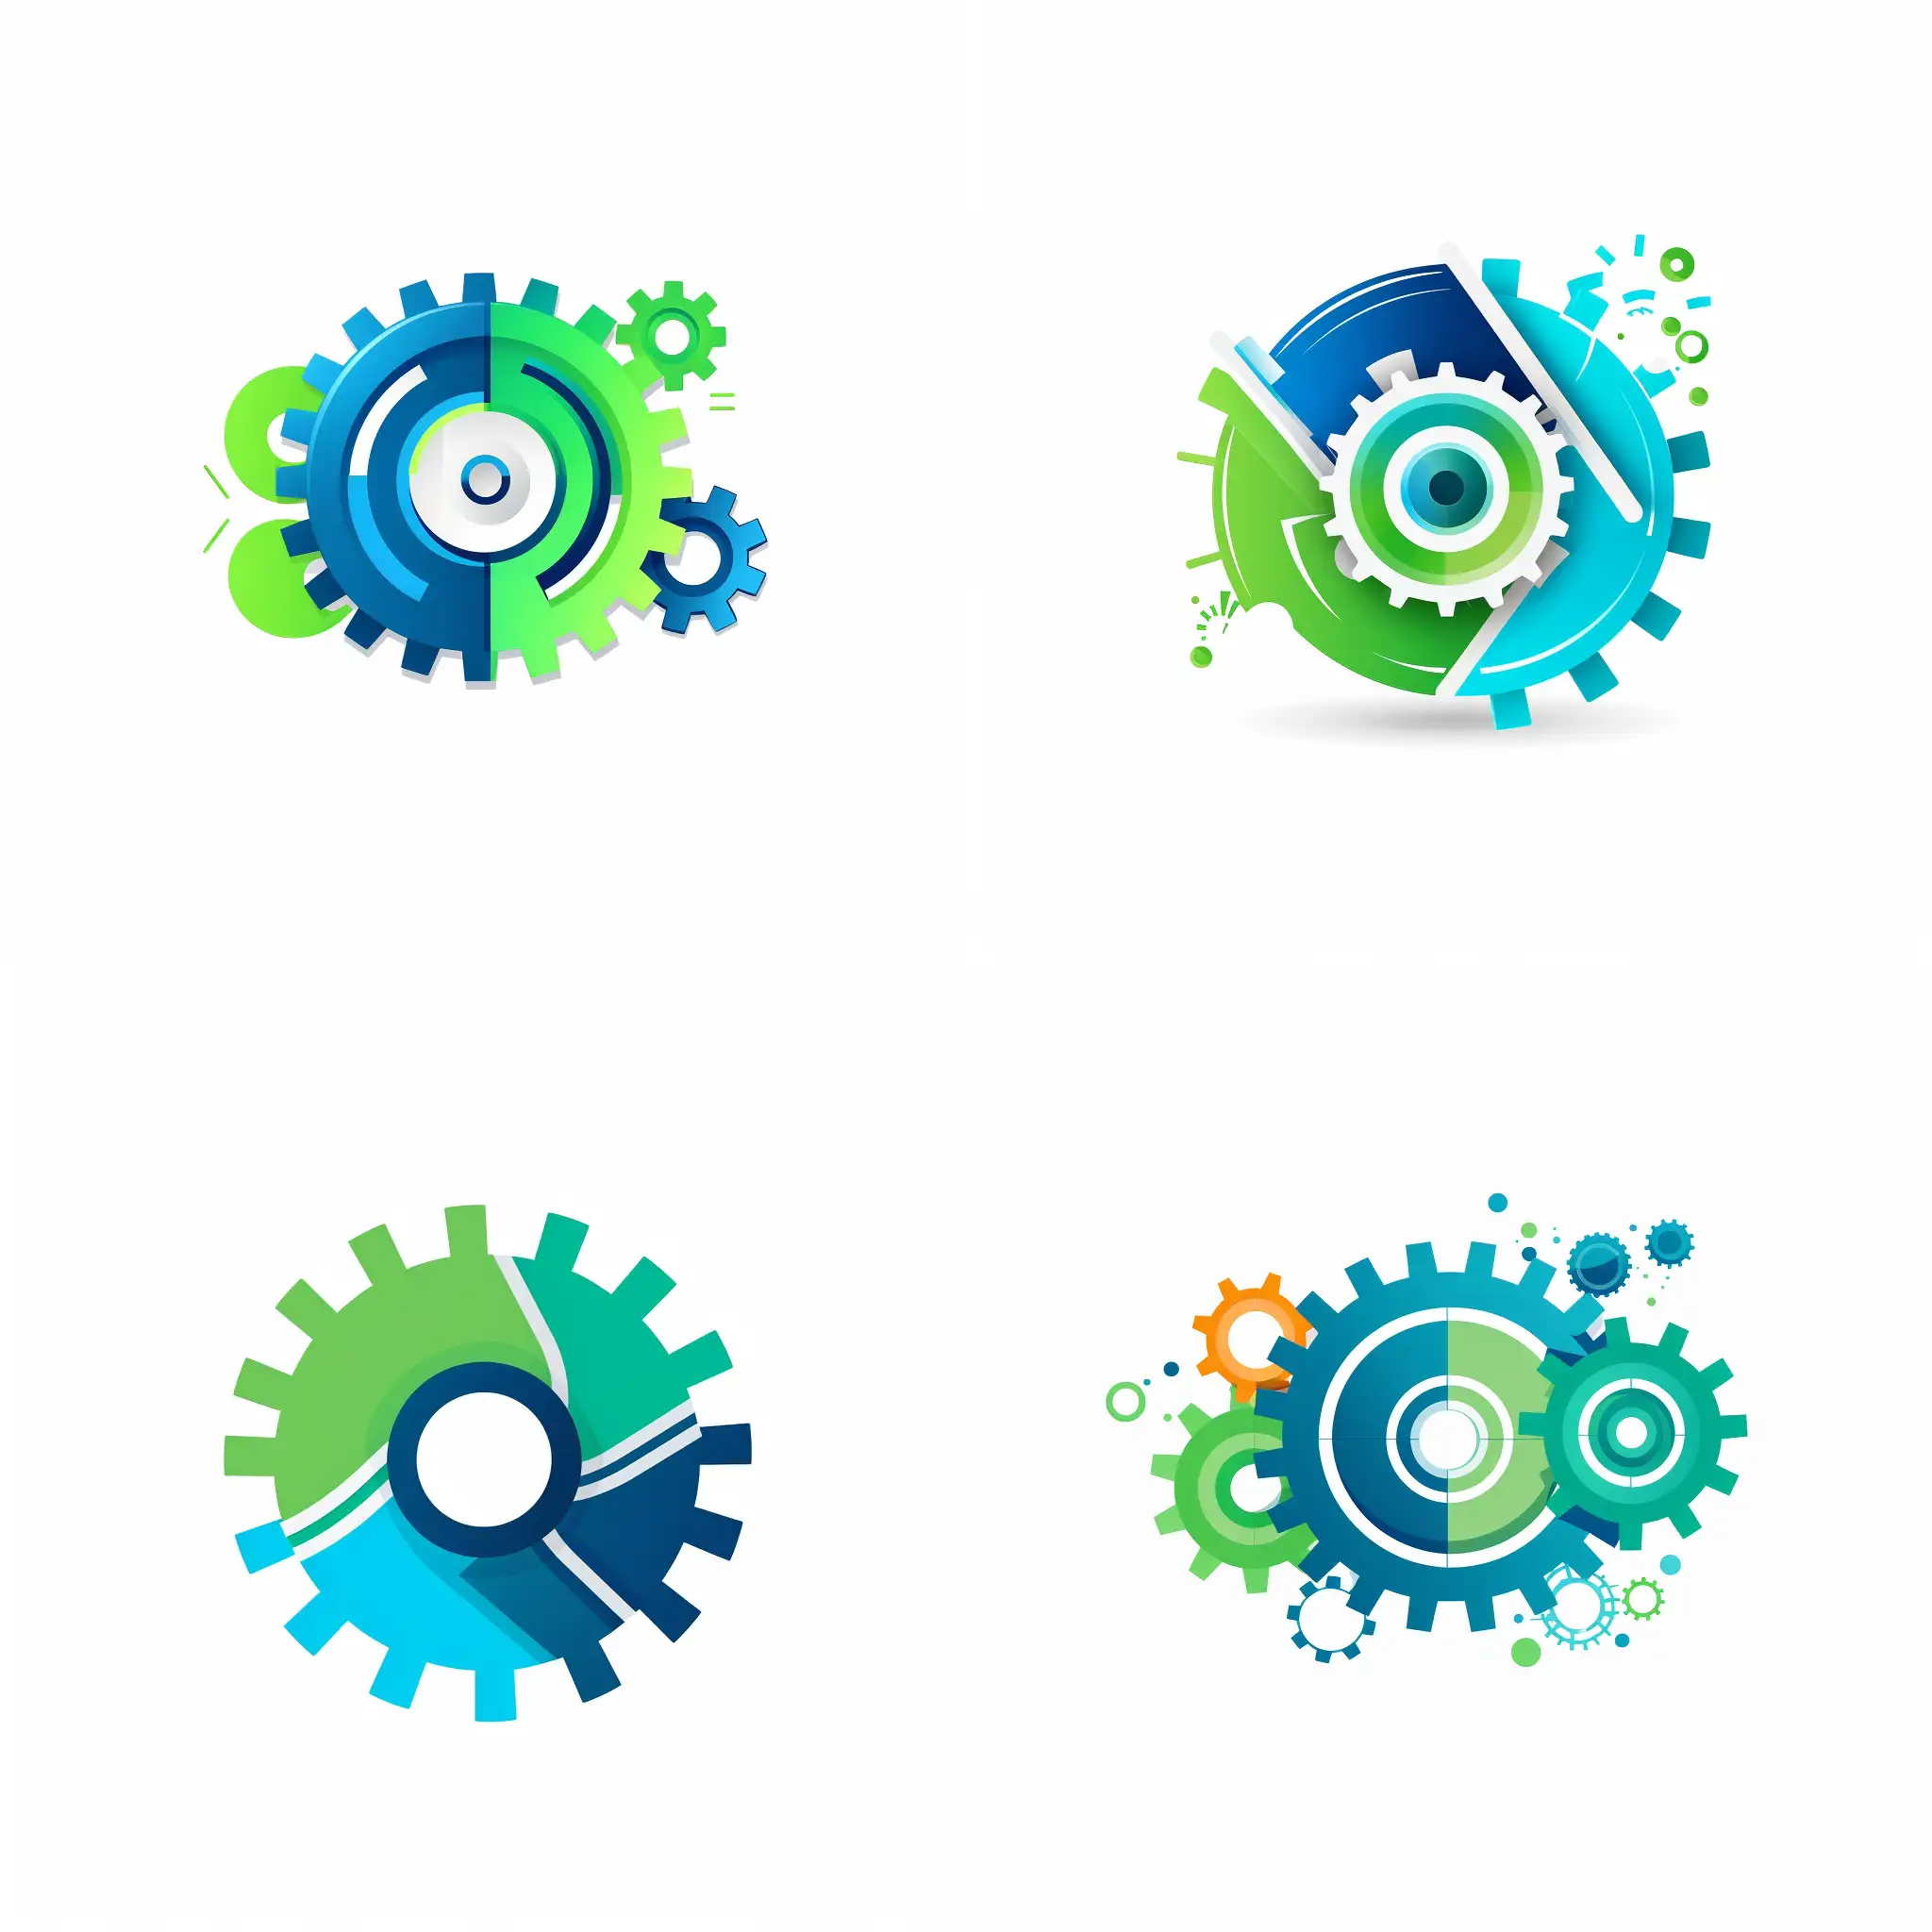 Efficient-Business-Growth-Interconnected-Gear-System-in-Blue-and-Green